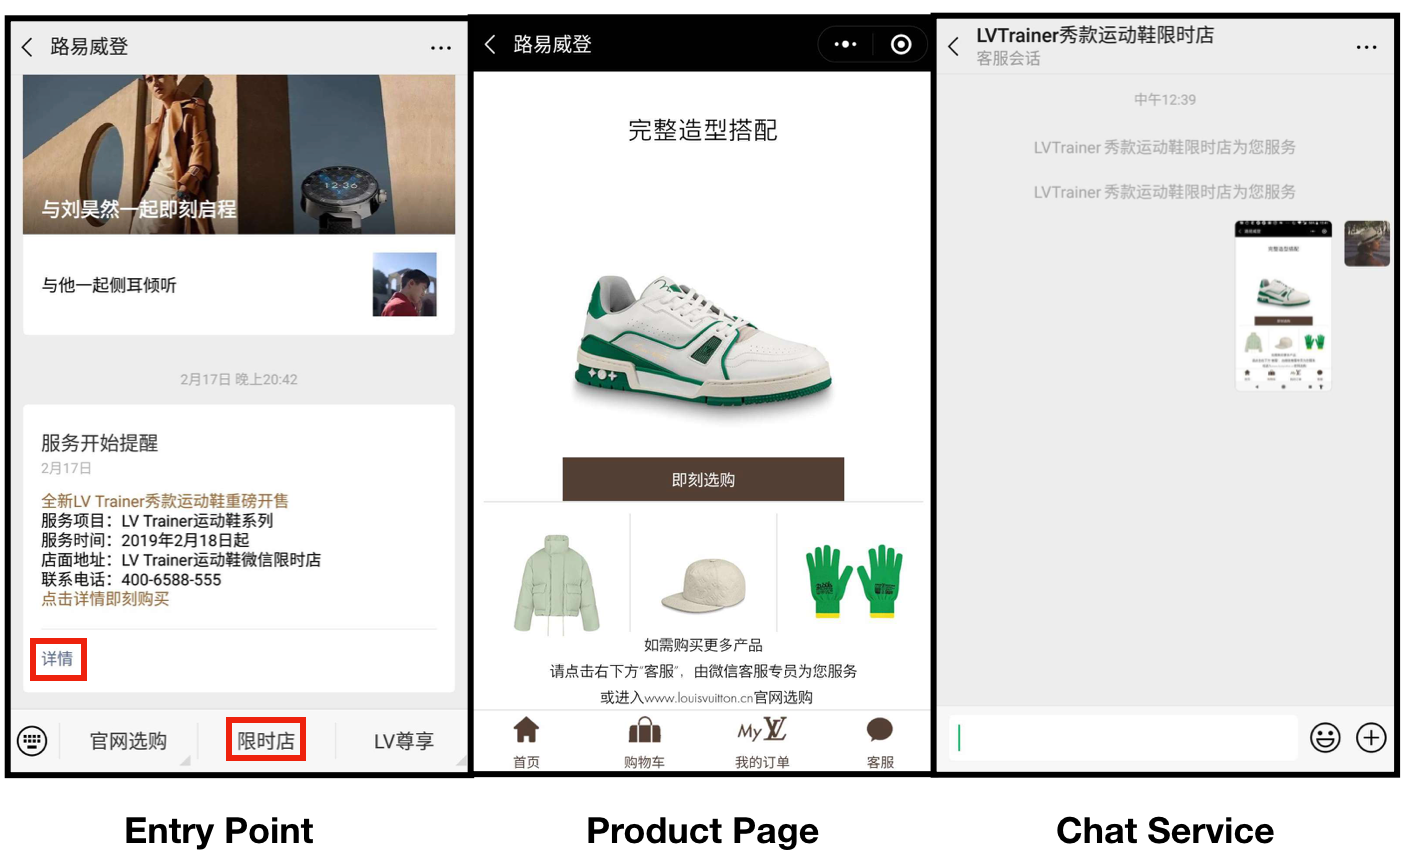 Louis Vuitton released the new “LV Trainer” sneaker collection (available for 1,316 to 1,860) — via the brand’s WeChat pop-up store enabled by the mini-program. Photo: Jing Daily illustration